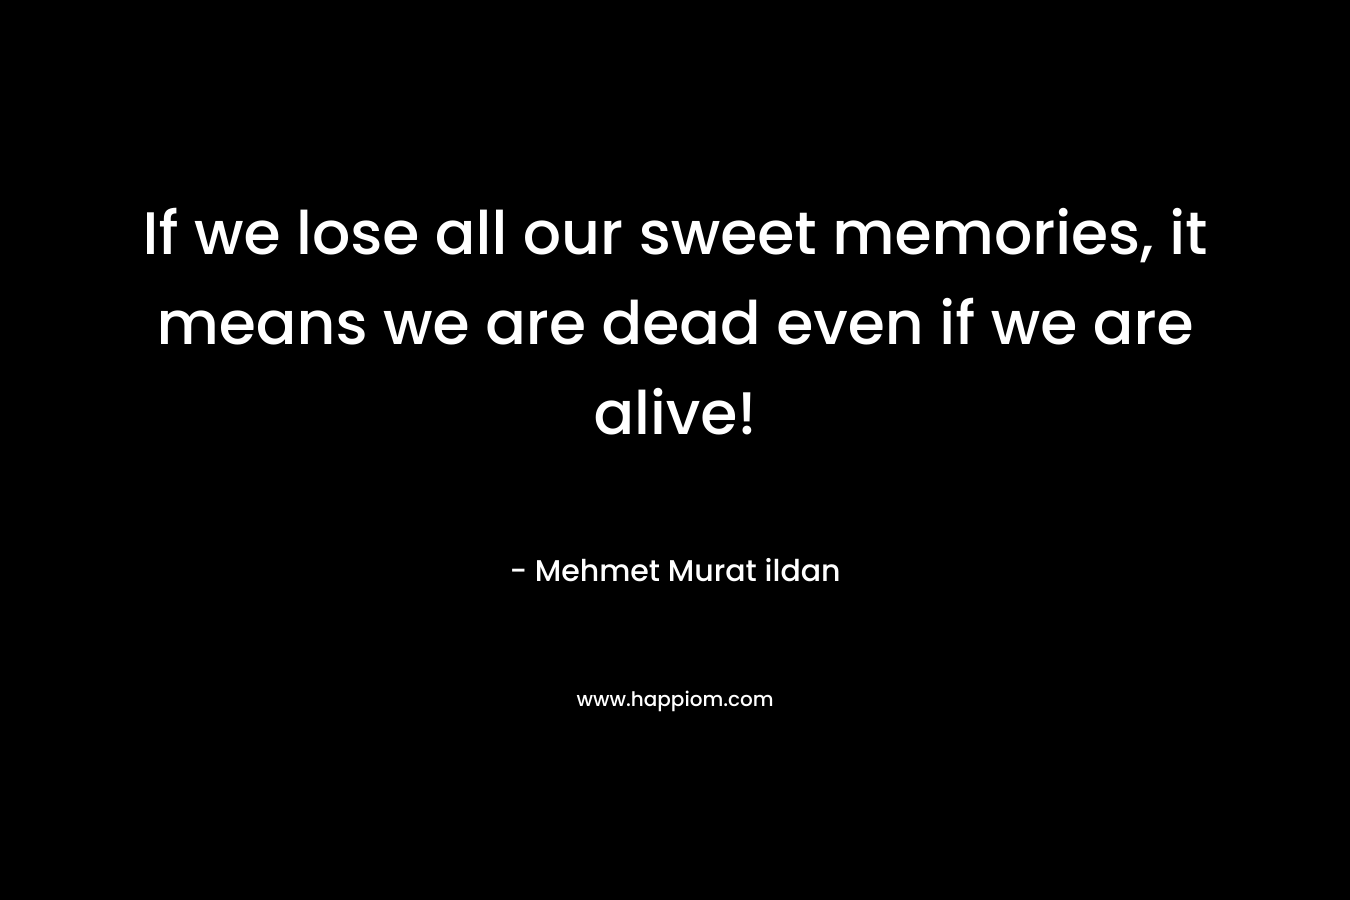 If we lose all our sweet memories, it means we are dead even if we are alive!